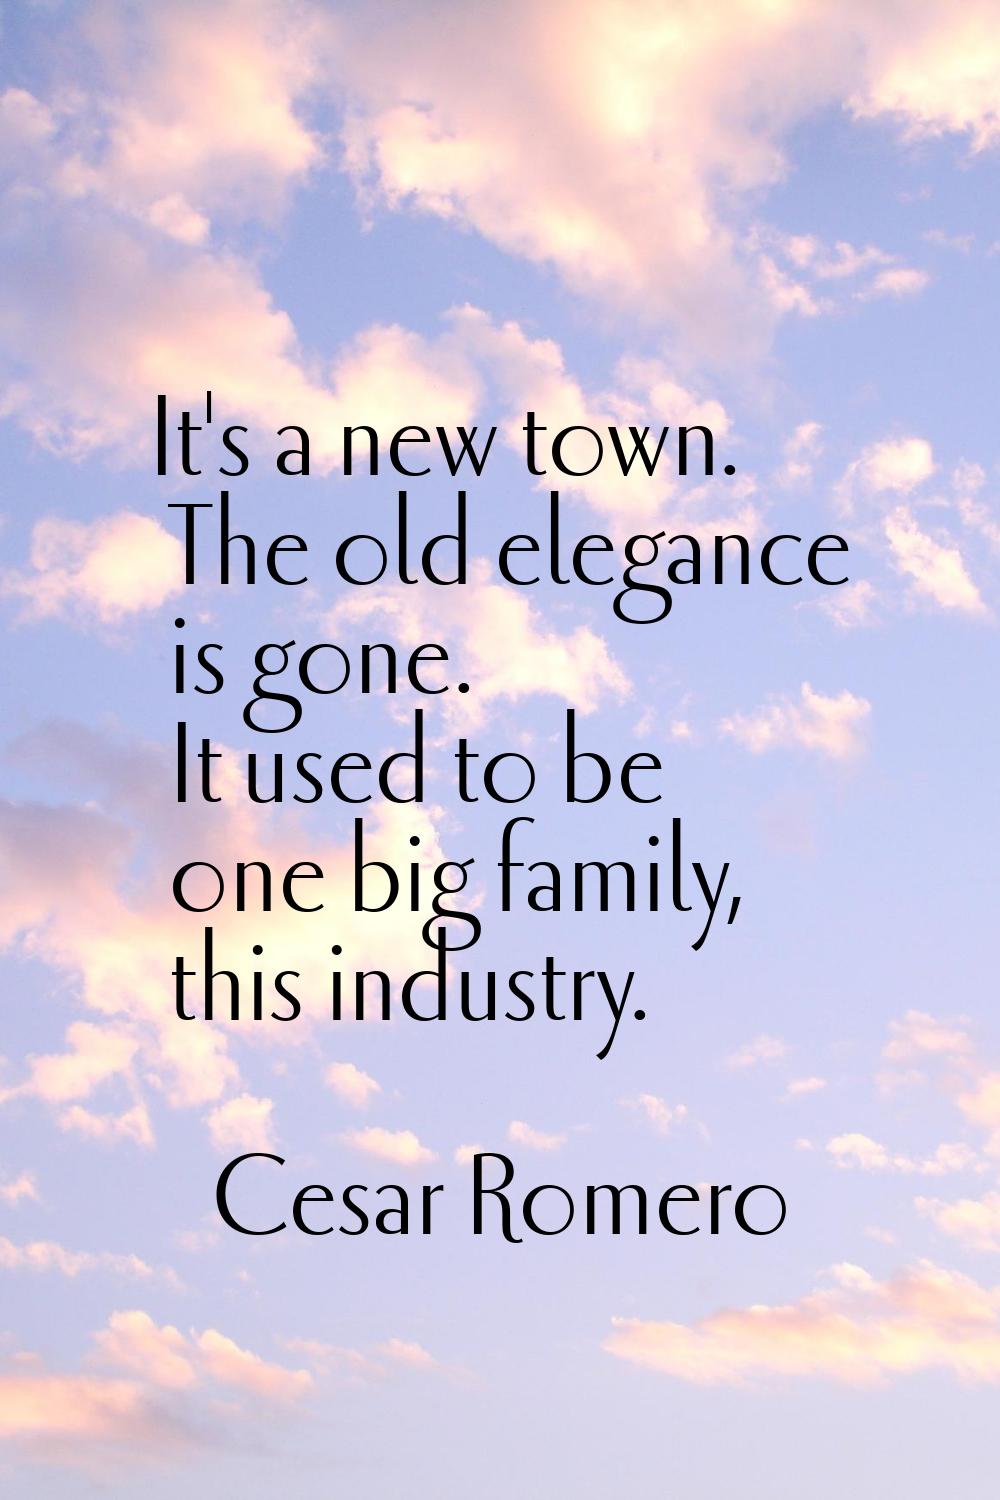 It's a new town. The old elegance is gone. It used to be one big family, this industry.